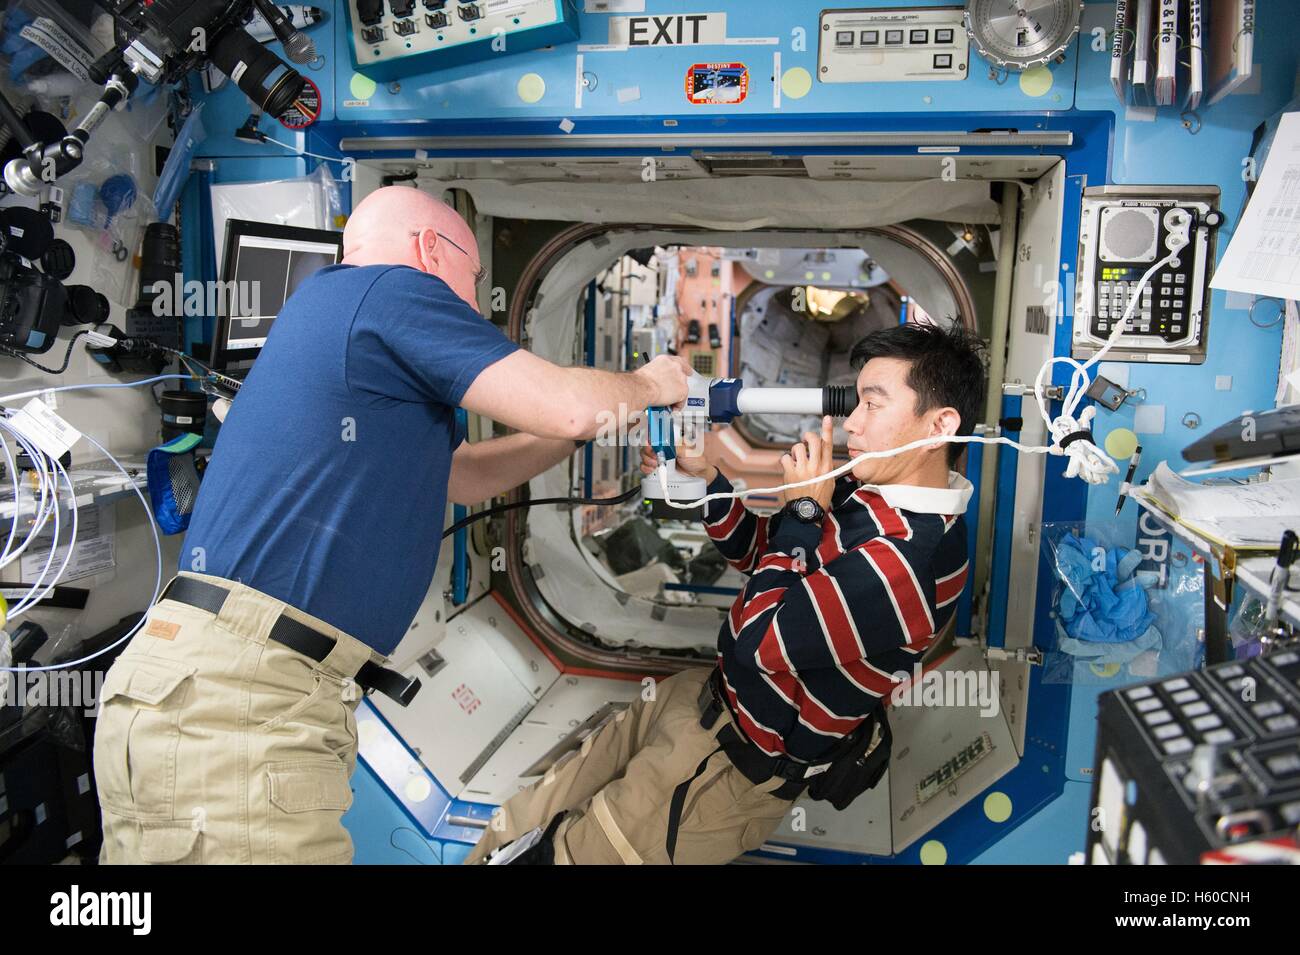 NASA International Space Station Expedition 44 mission astronaut Scott Kelly assists Japanese astronaut Kimiya Yui of the Japan Aerospace Exploration Agency in taking retinal images for an ongoing Ocular Health study August 5, 2015 while in Earth orbit. Stock Photo